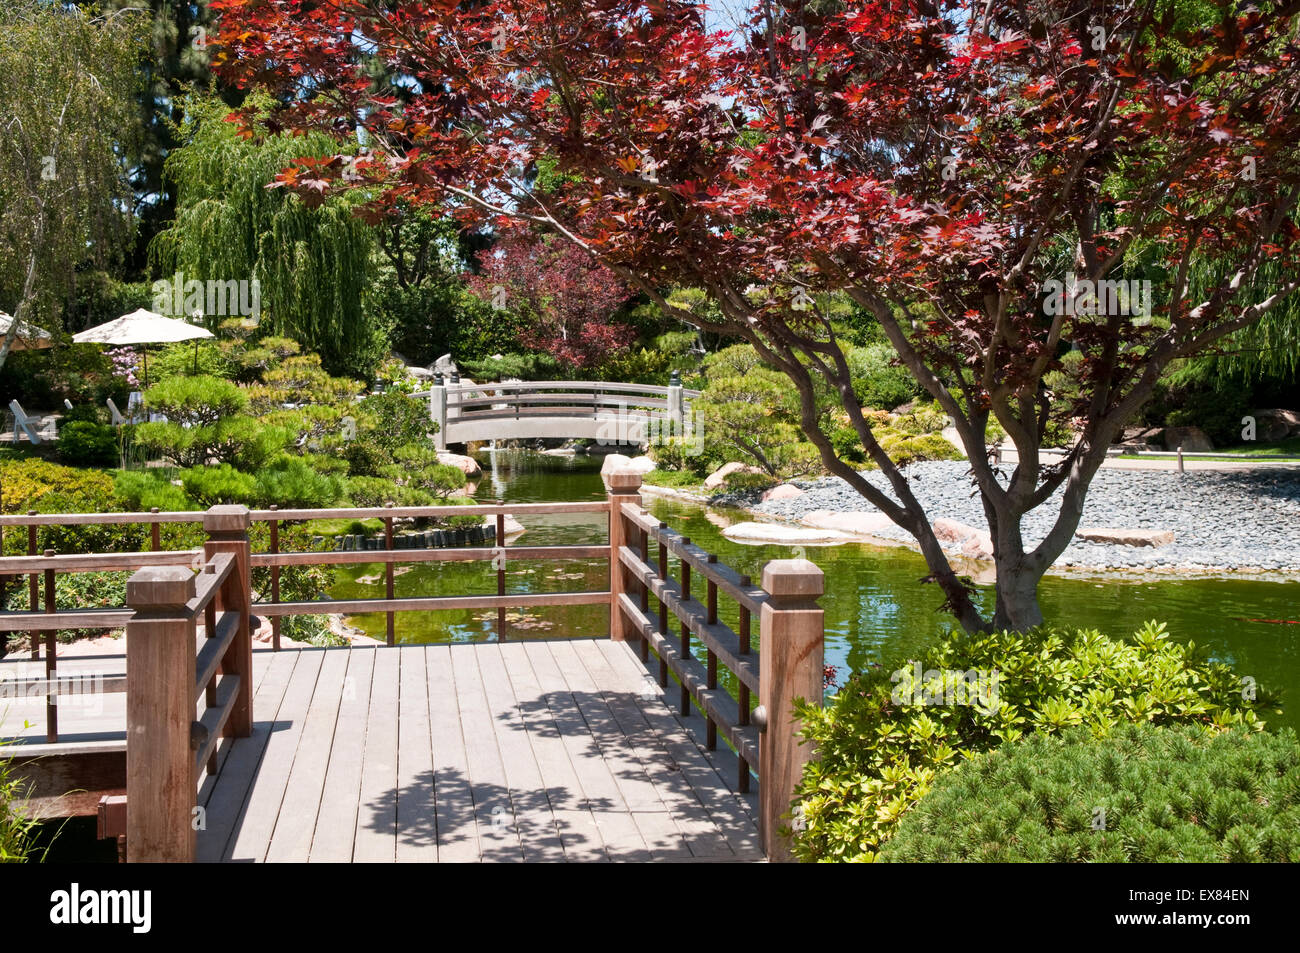 The Earl Burns Miller Japanese Garden at the campus of California State University, Long Beach, California Stock Photo